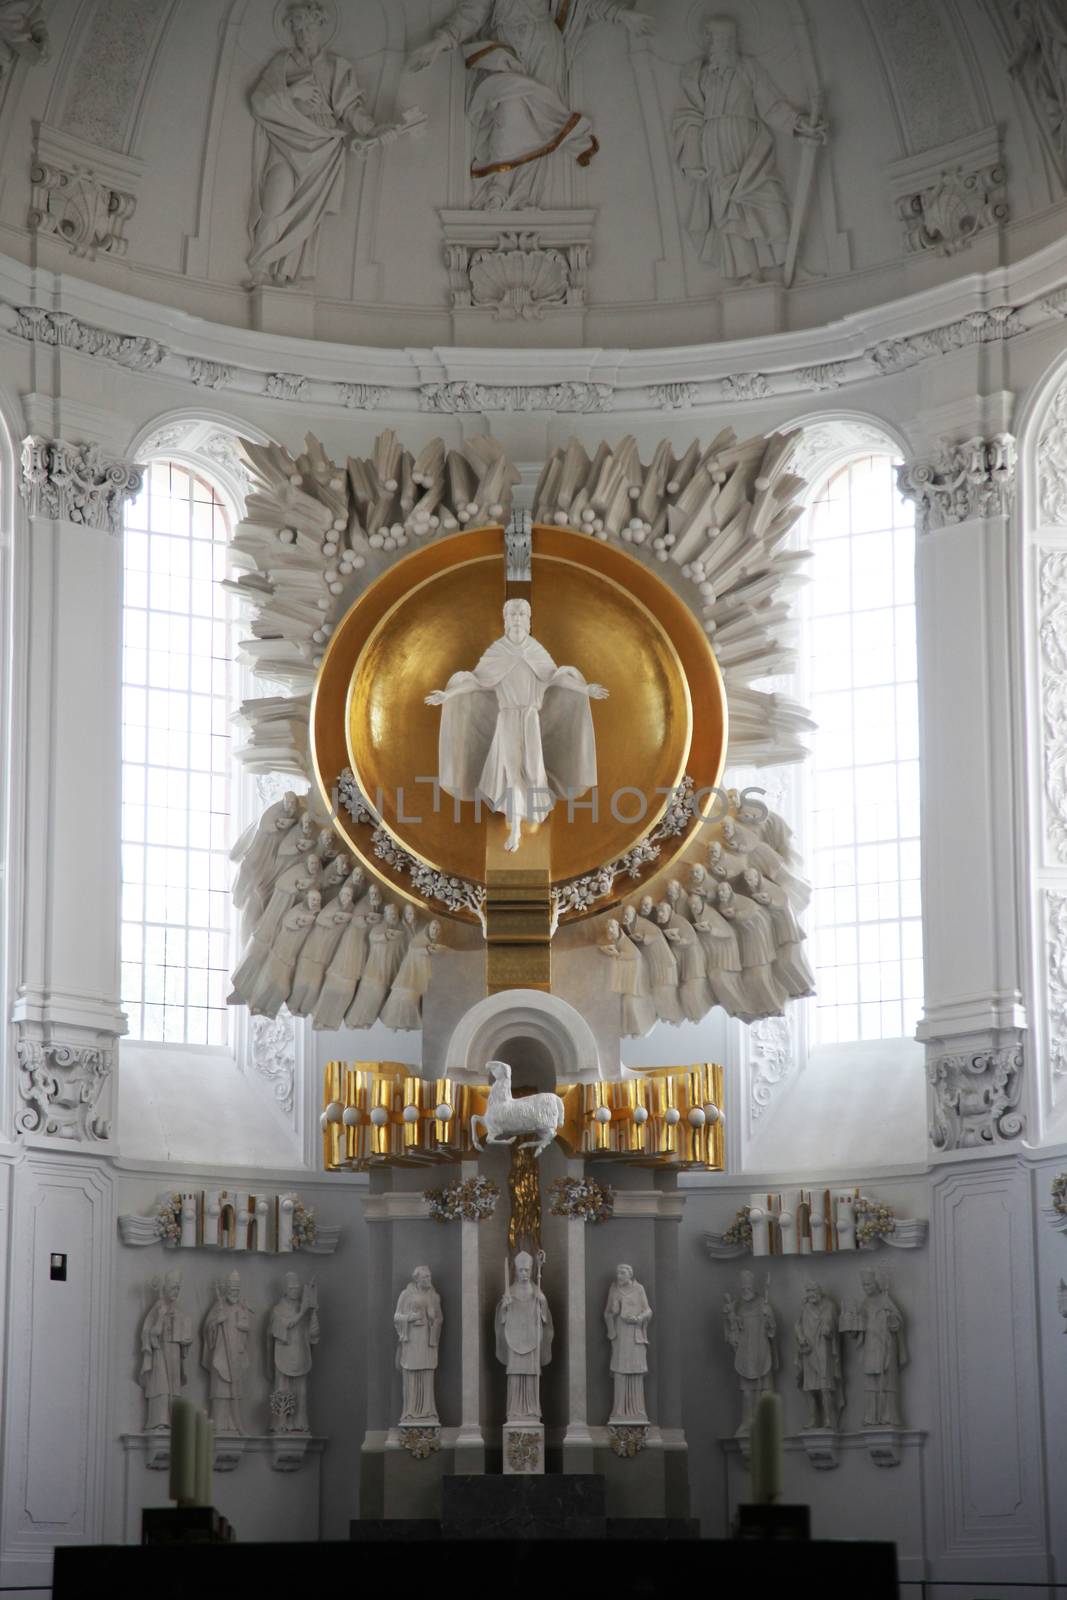 Altar in the Wurzburg Cathedral by atlas